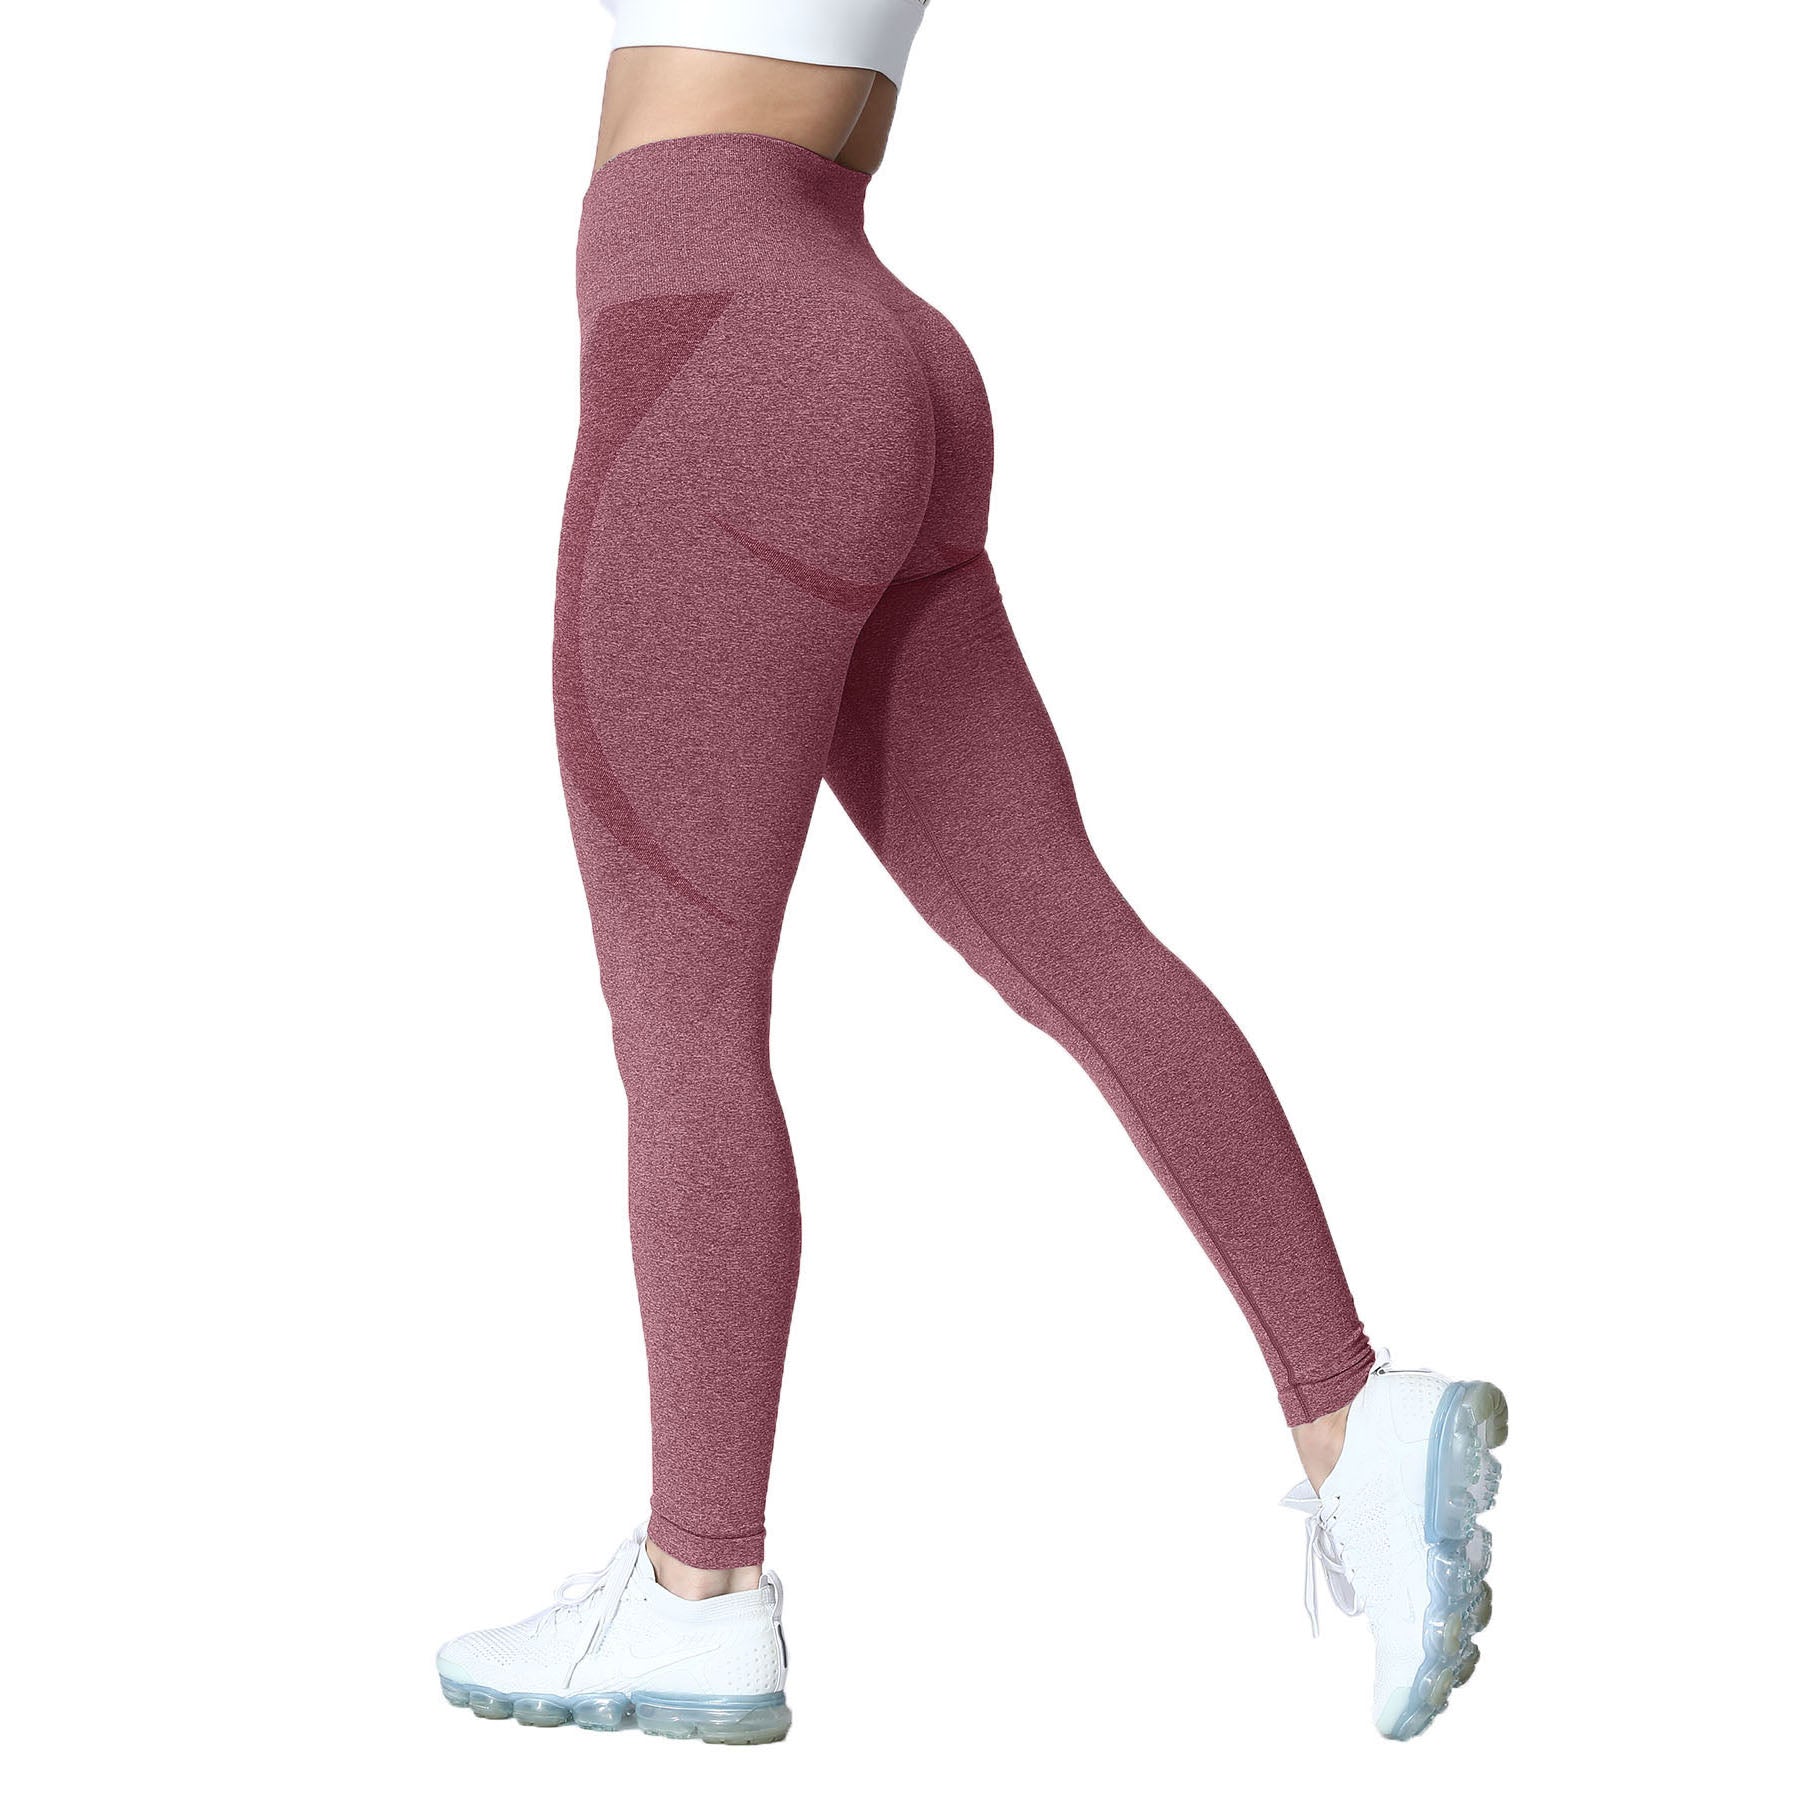 Aoxjox Purple Seamless Contour Leggings Size XS - $23 - From Bella